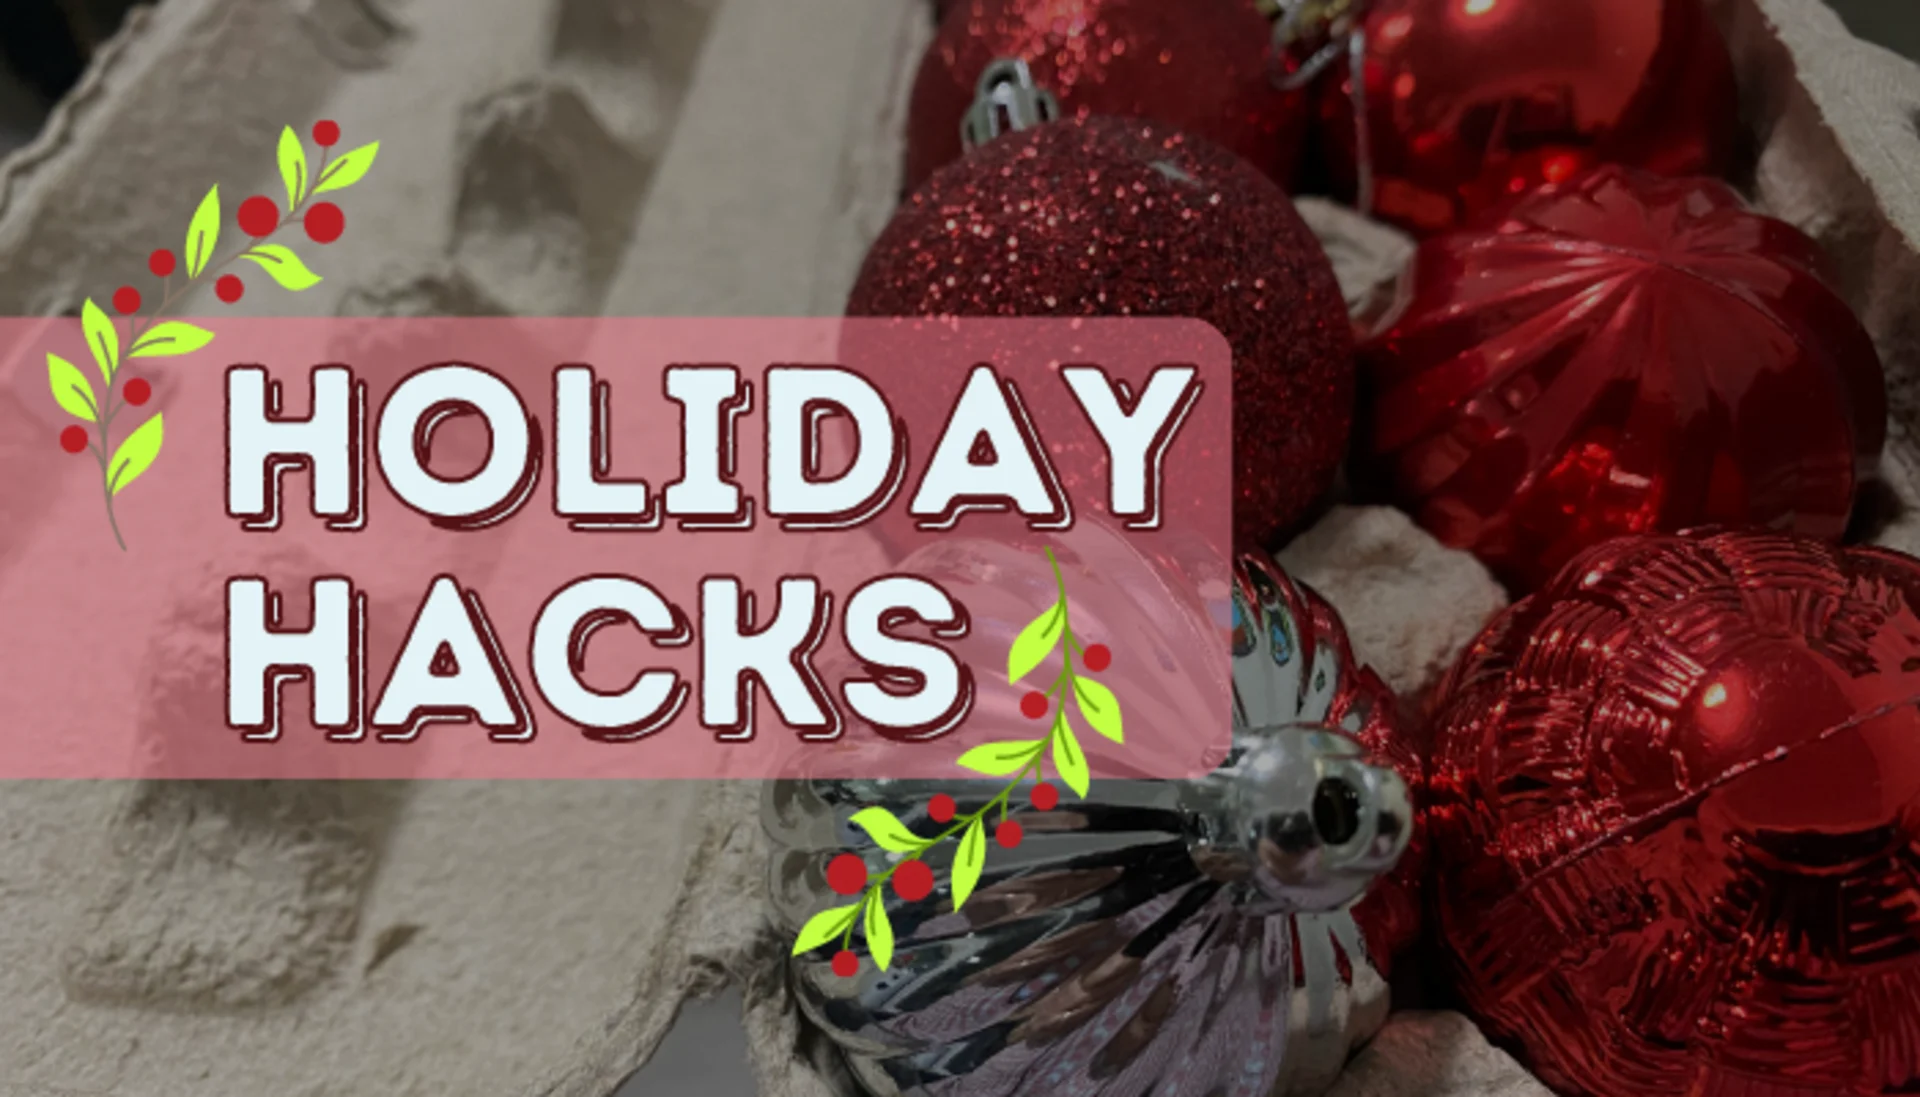 Make your season merry and bright with these holiday hacks